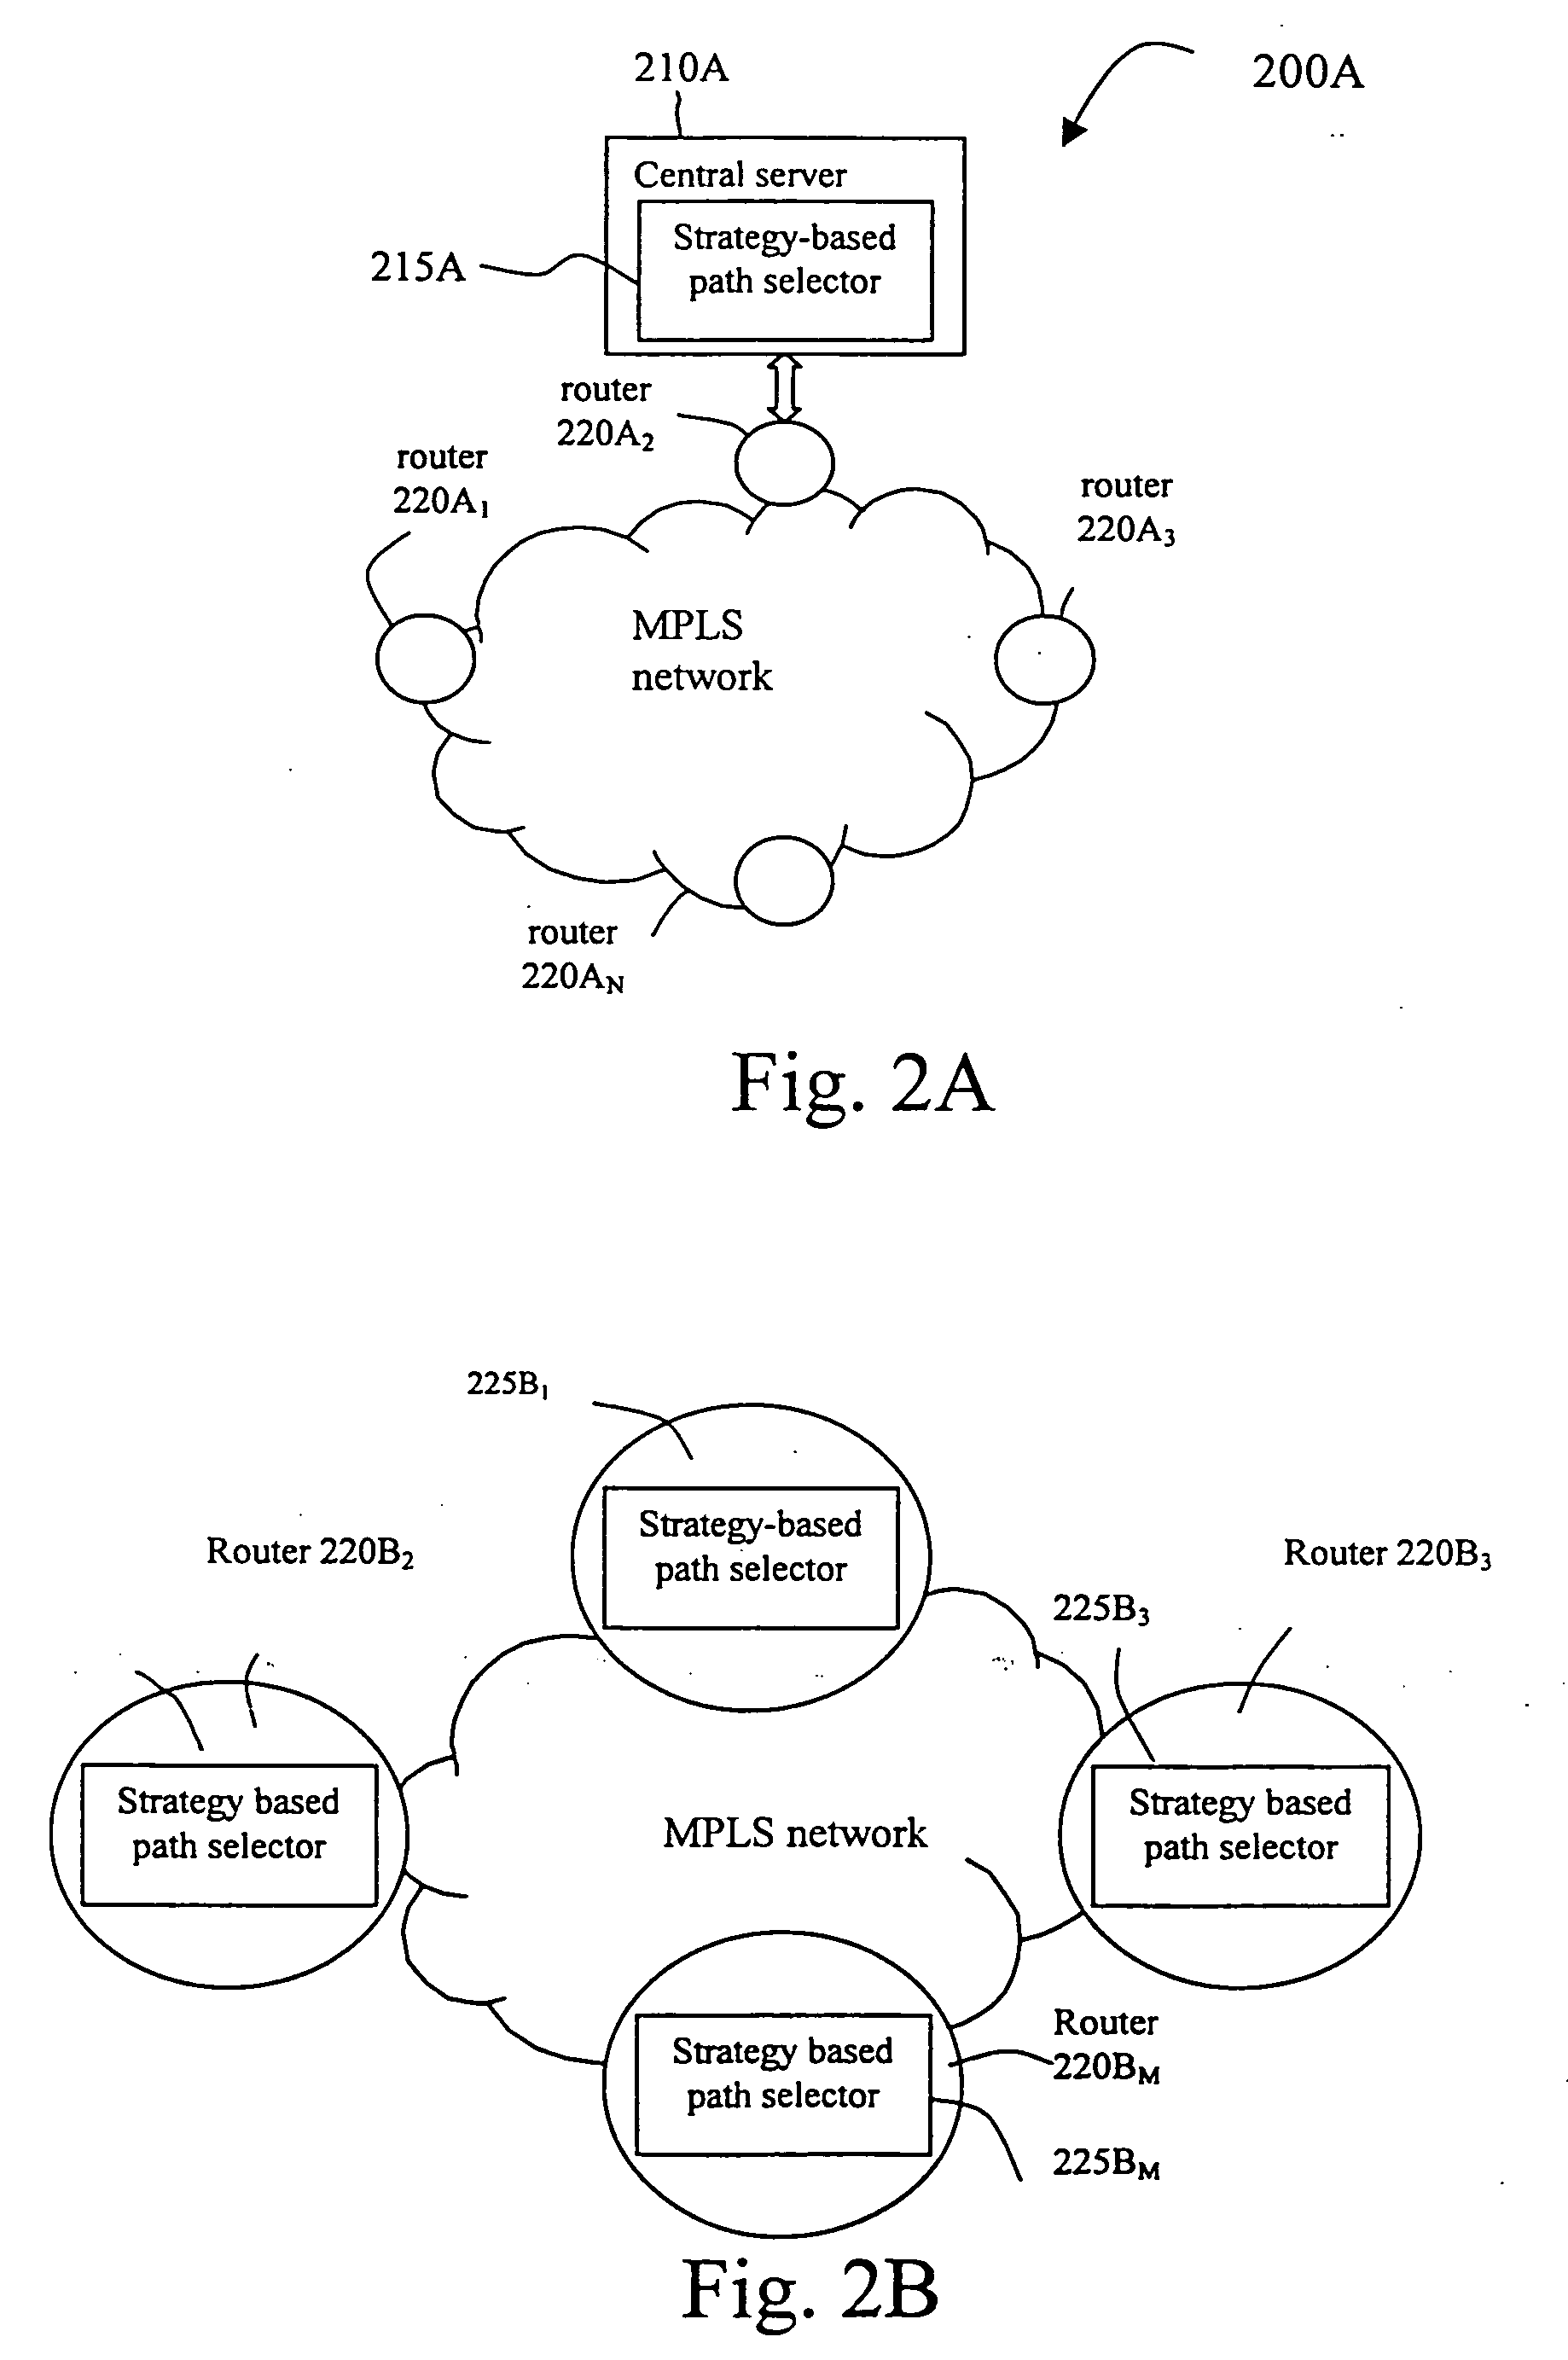 Method and apparatus for path selection in telecommunication networks